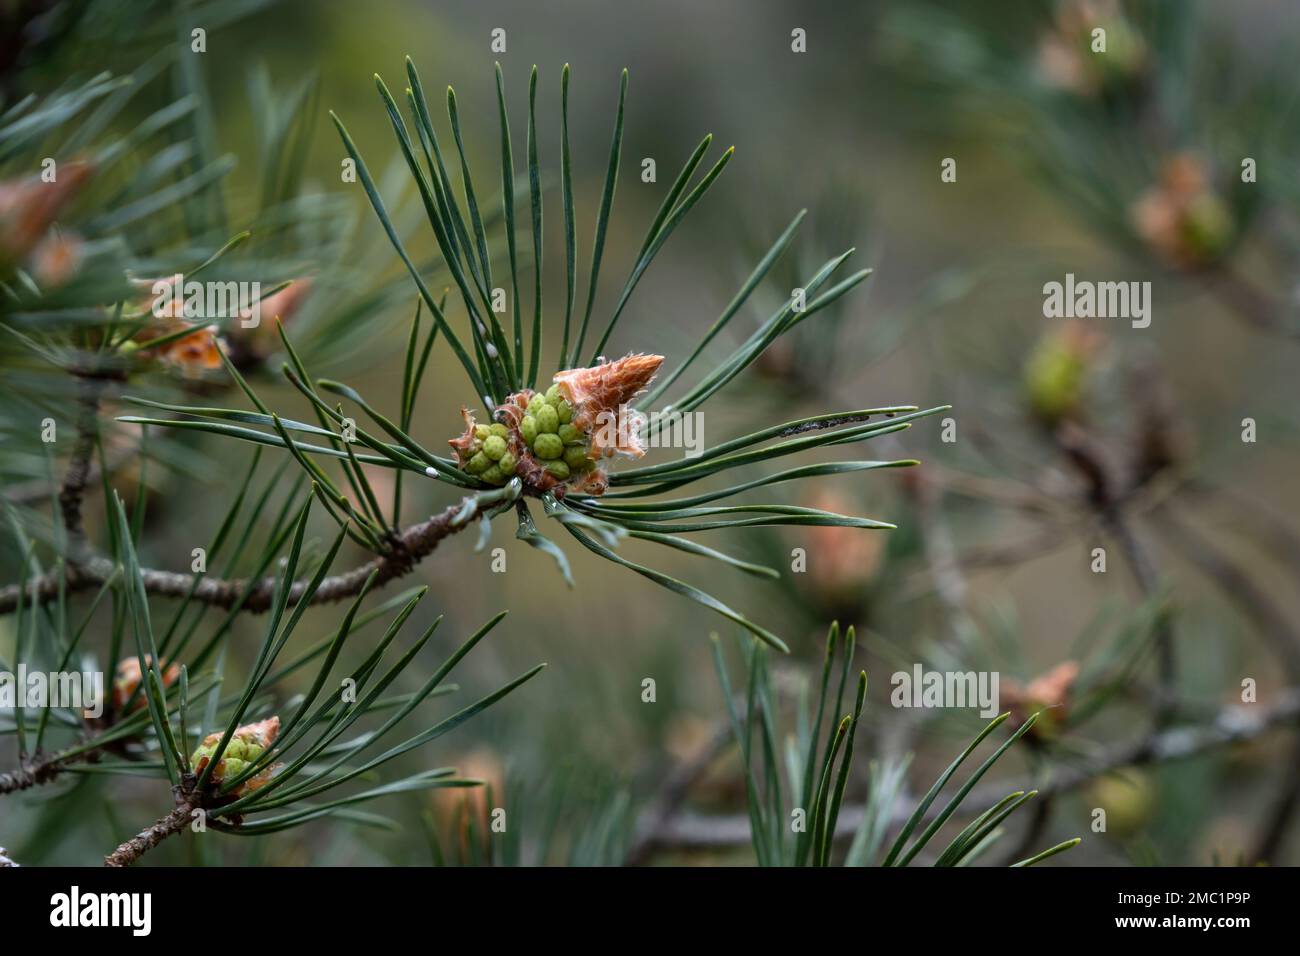 Scots pine (Pinus sylvestris) young seed cone Stock Photo